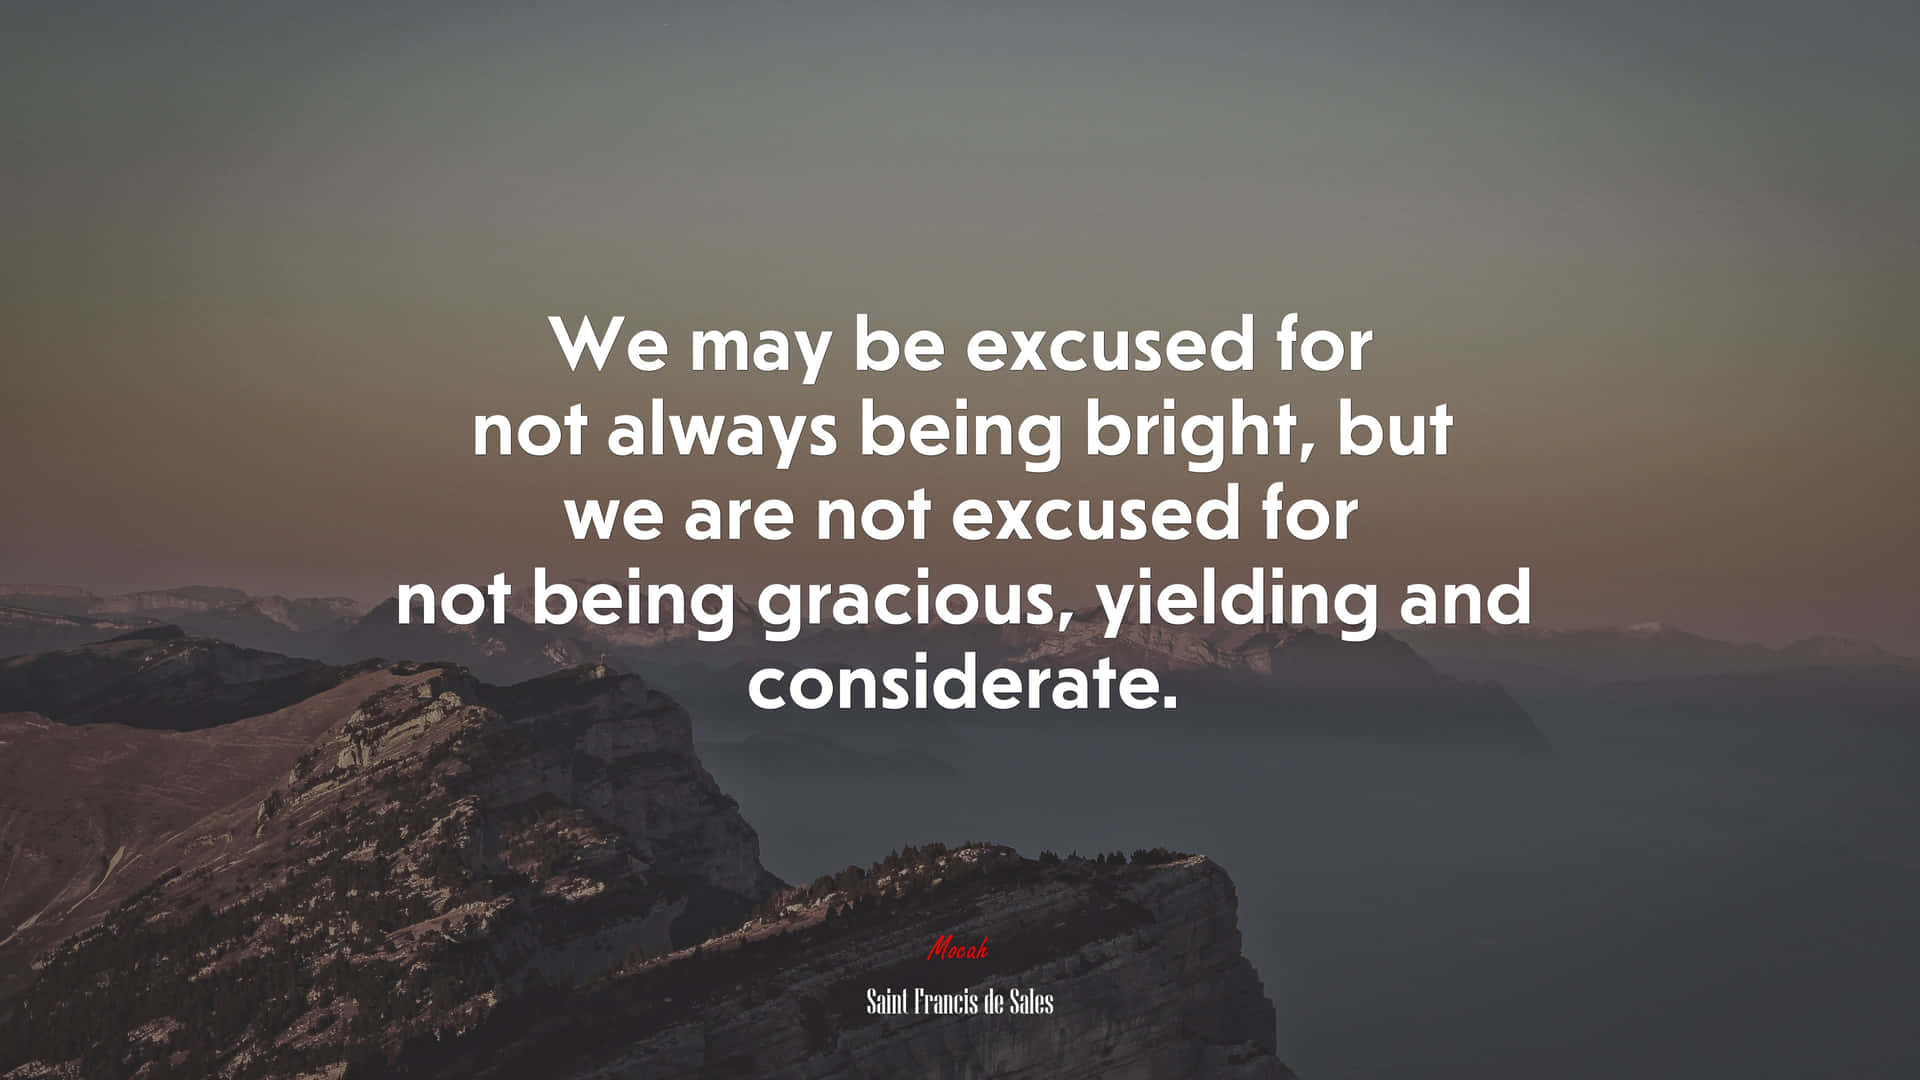 People Are Not Excused Of Being Considerate Quotes Wallpaper